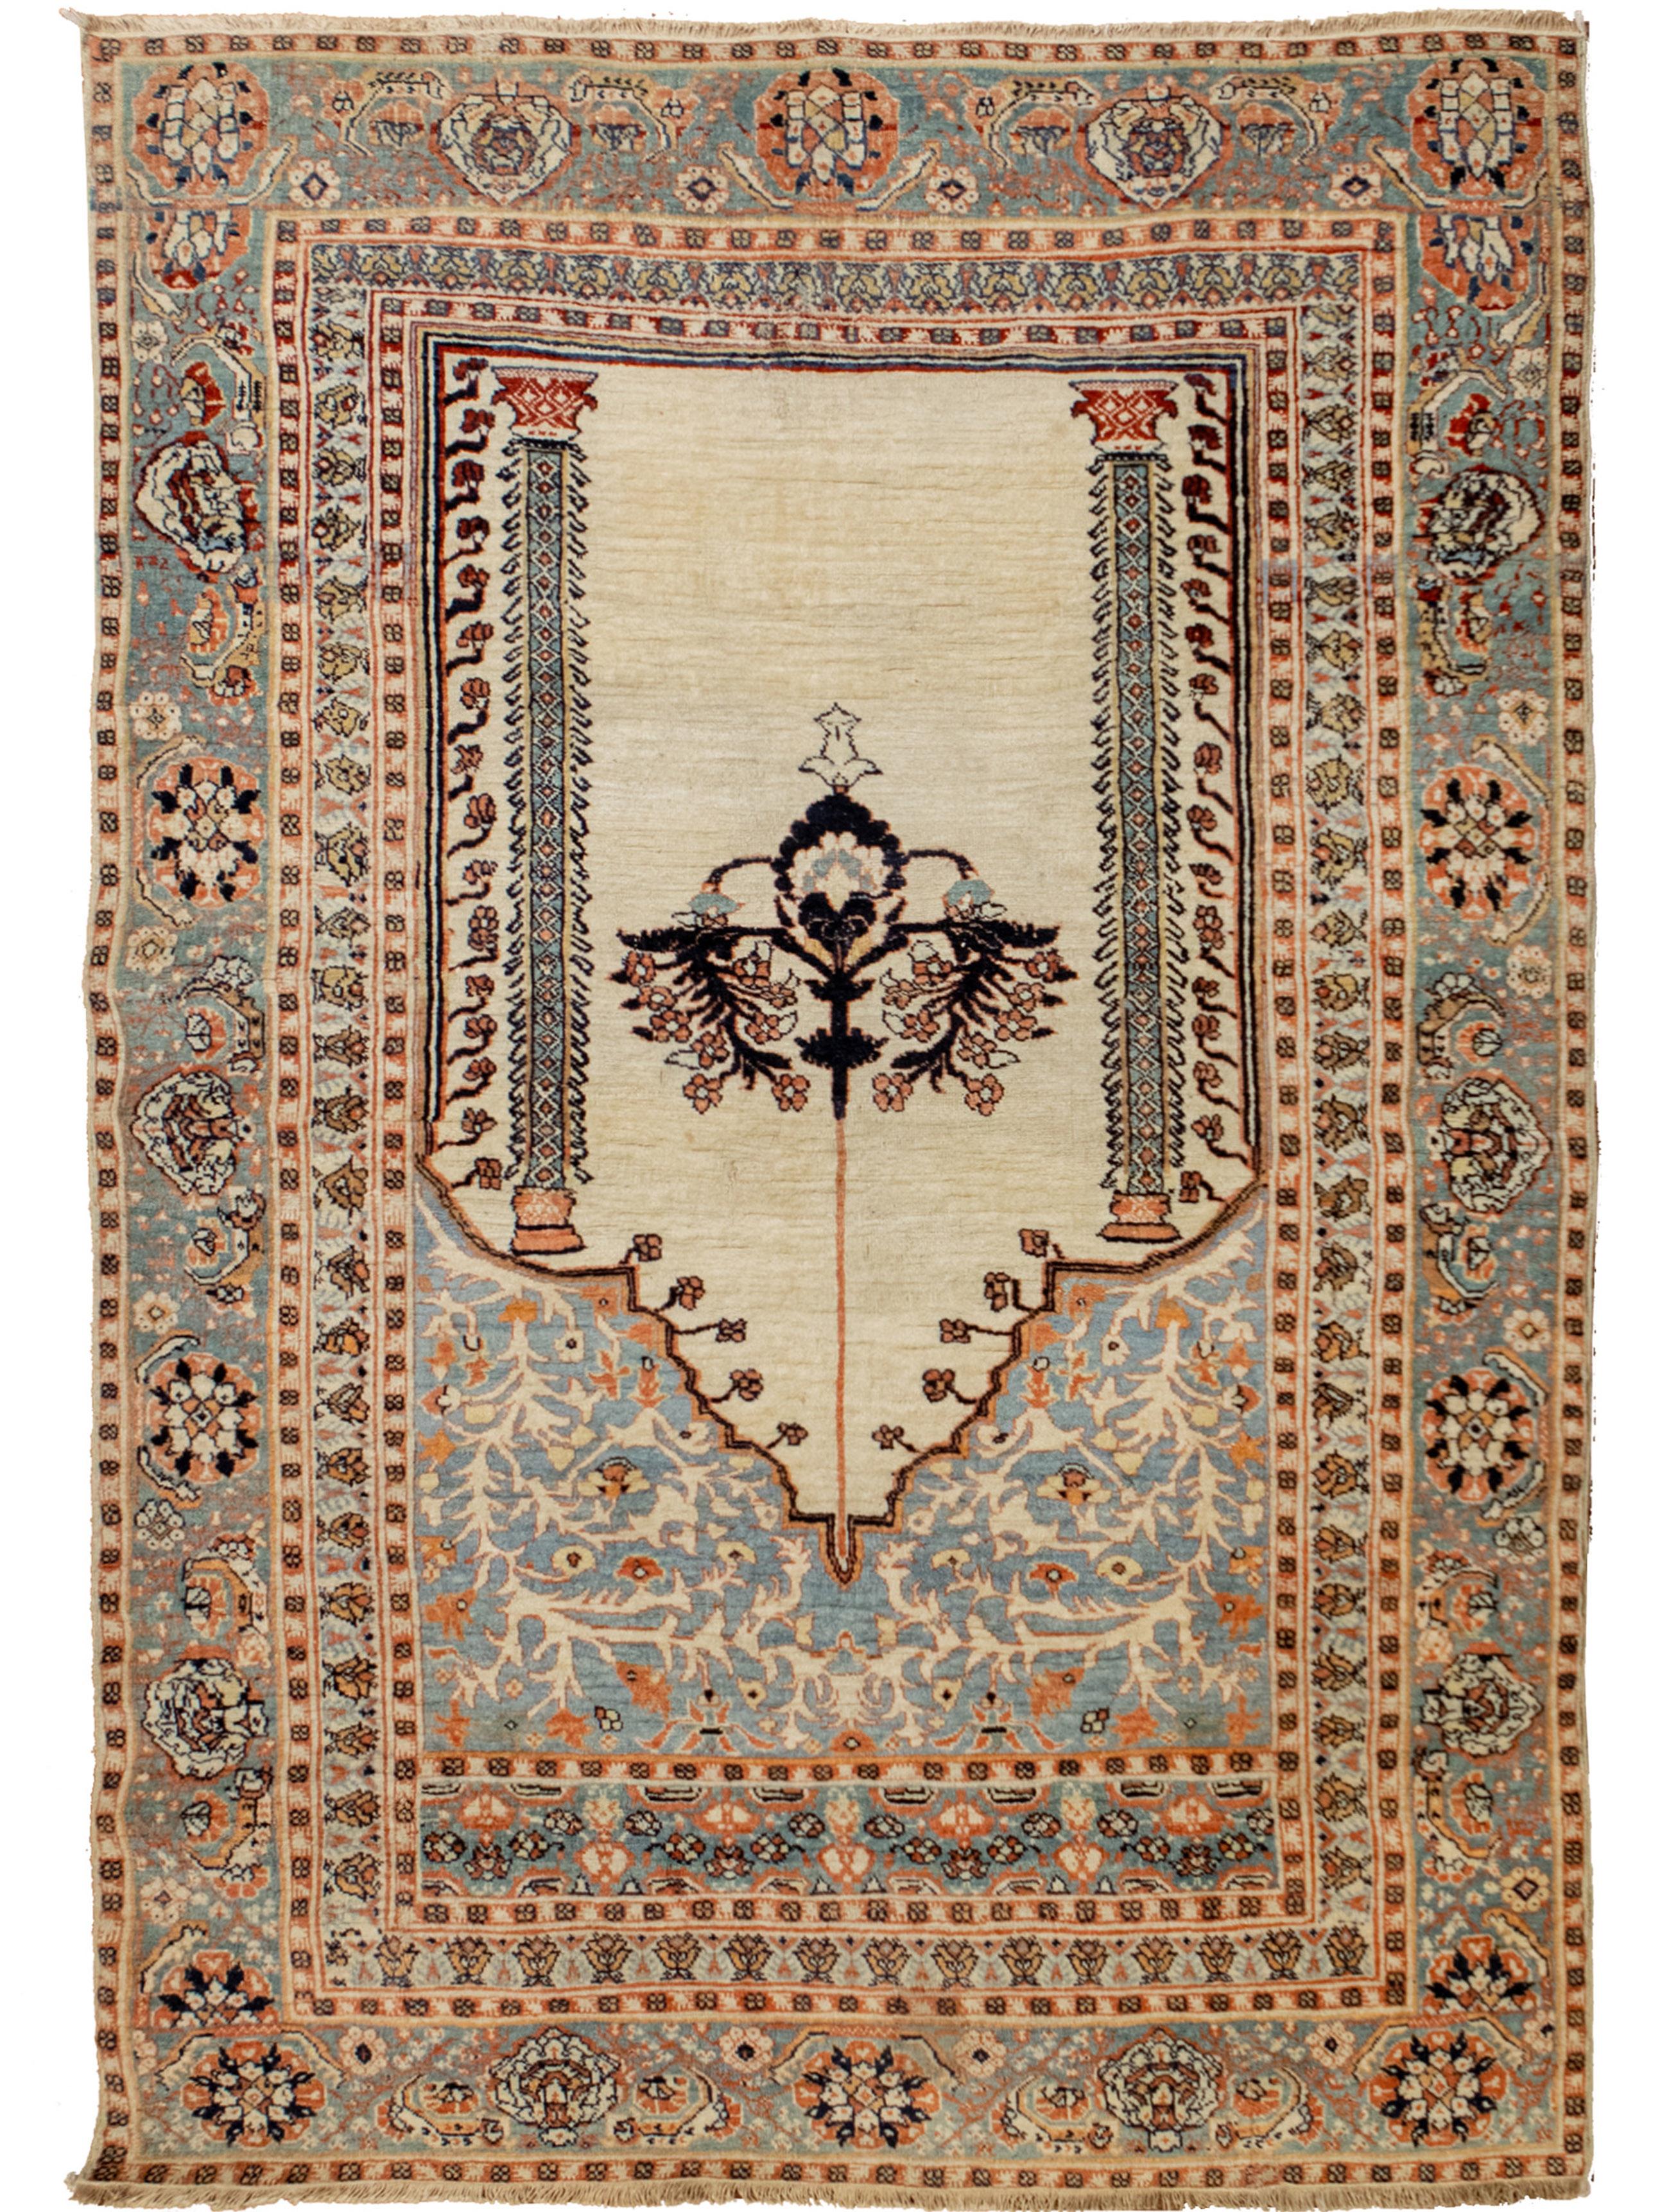 20th Century Antique Persian Fine Tabriz Handwoven Luxury Wool Ivory/Light Green Rug For Sale